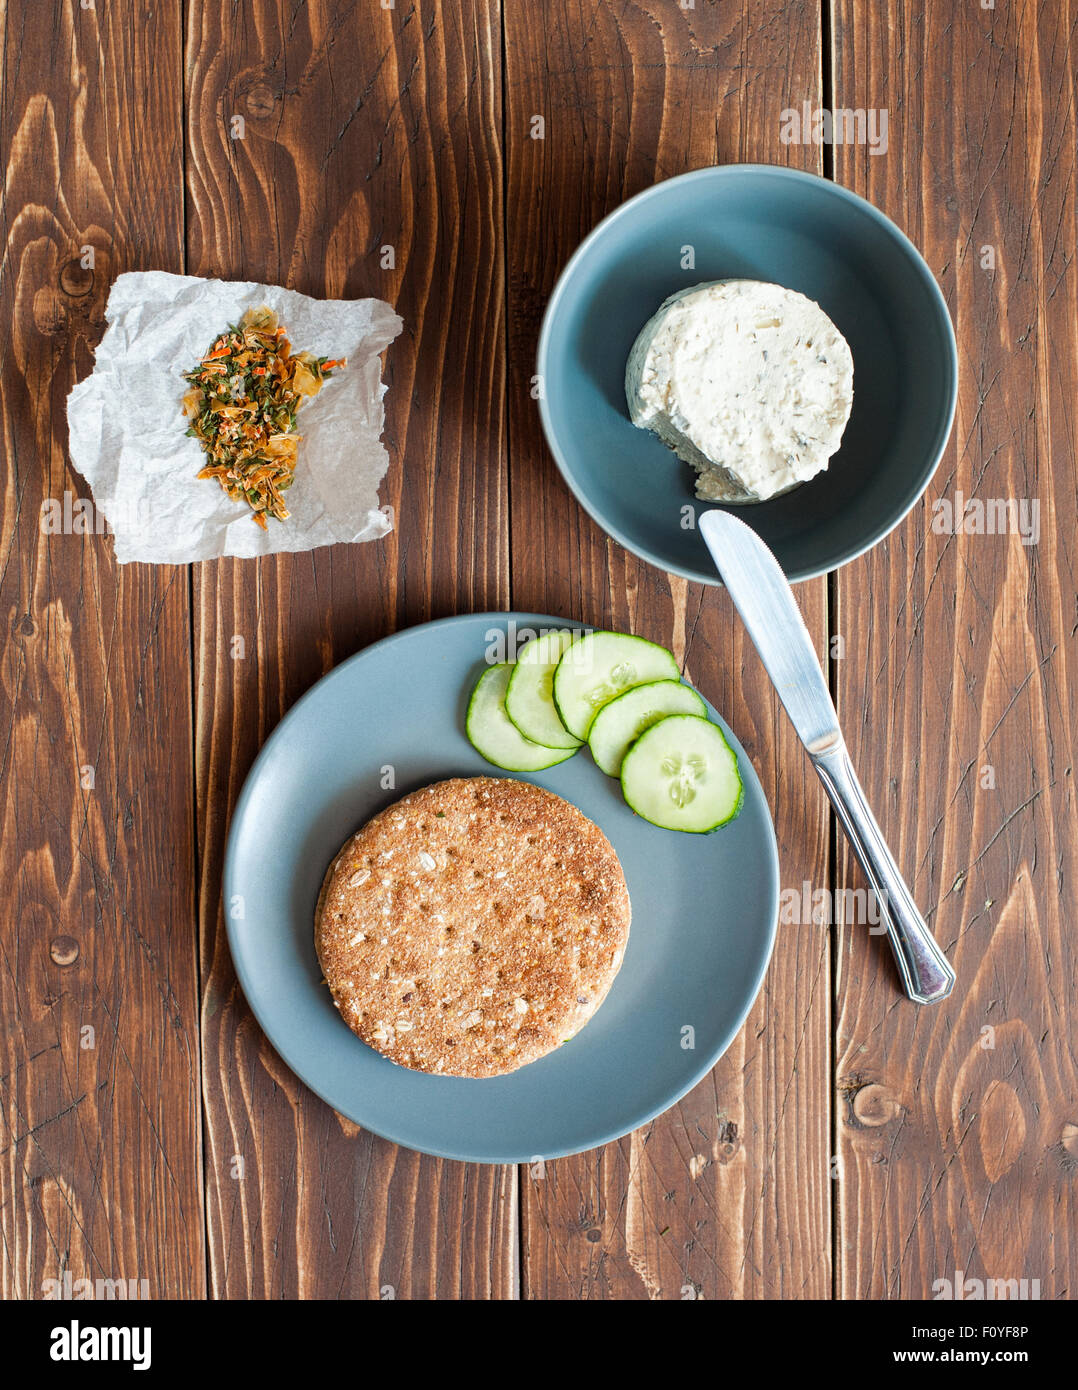 Sandwich with cheese and fresh cucumbers on the wooden background Stock Photo